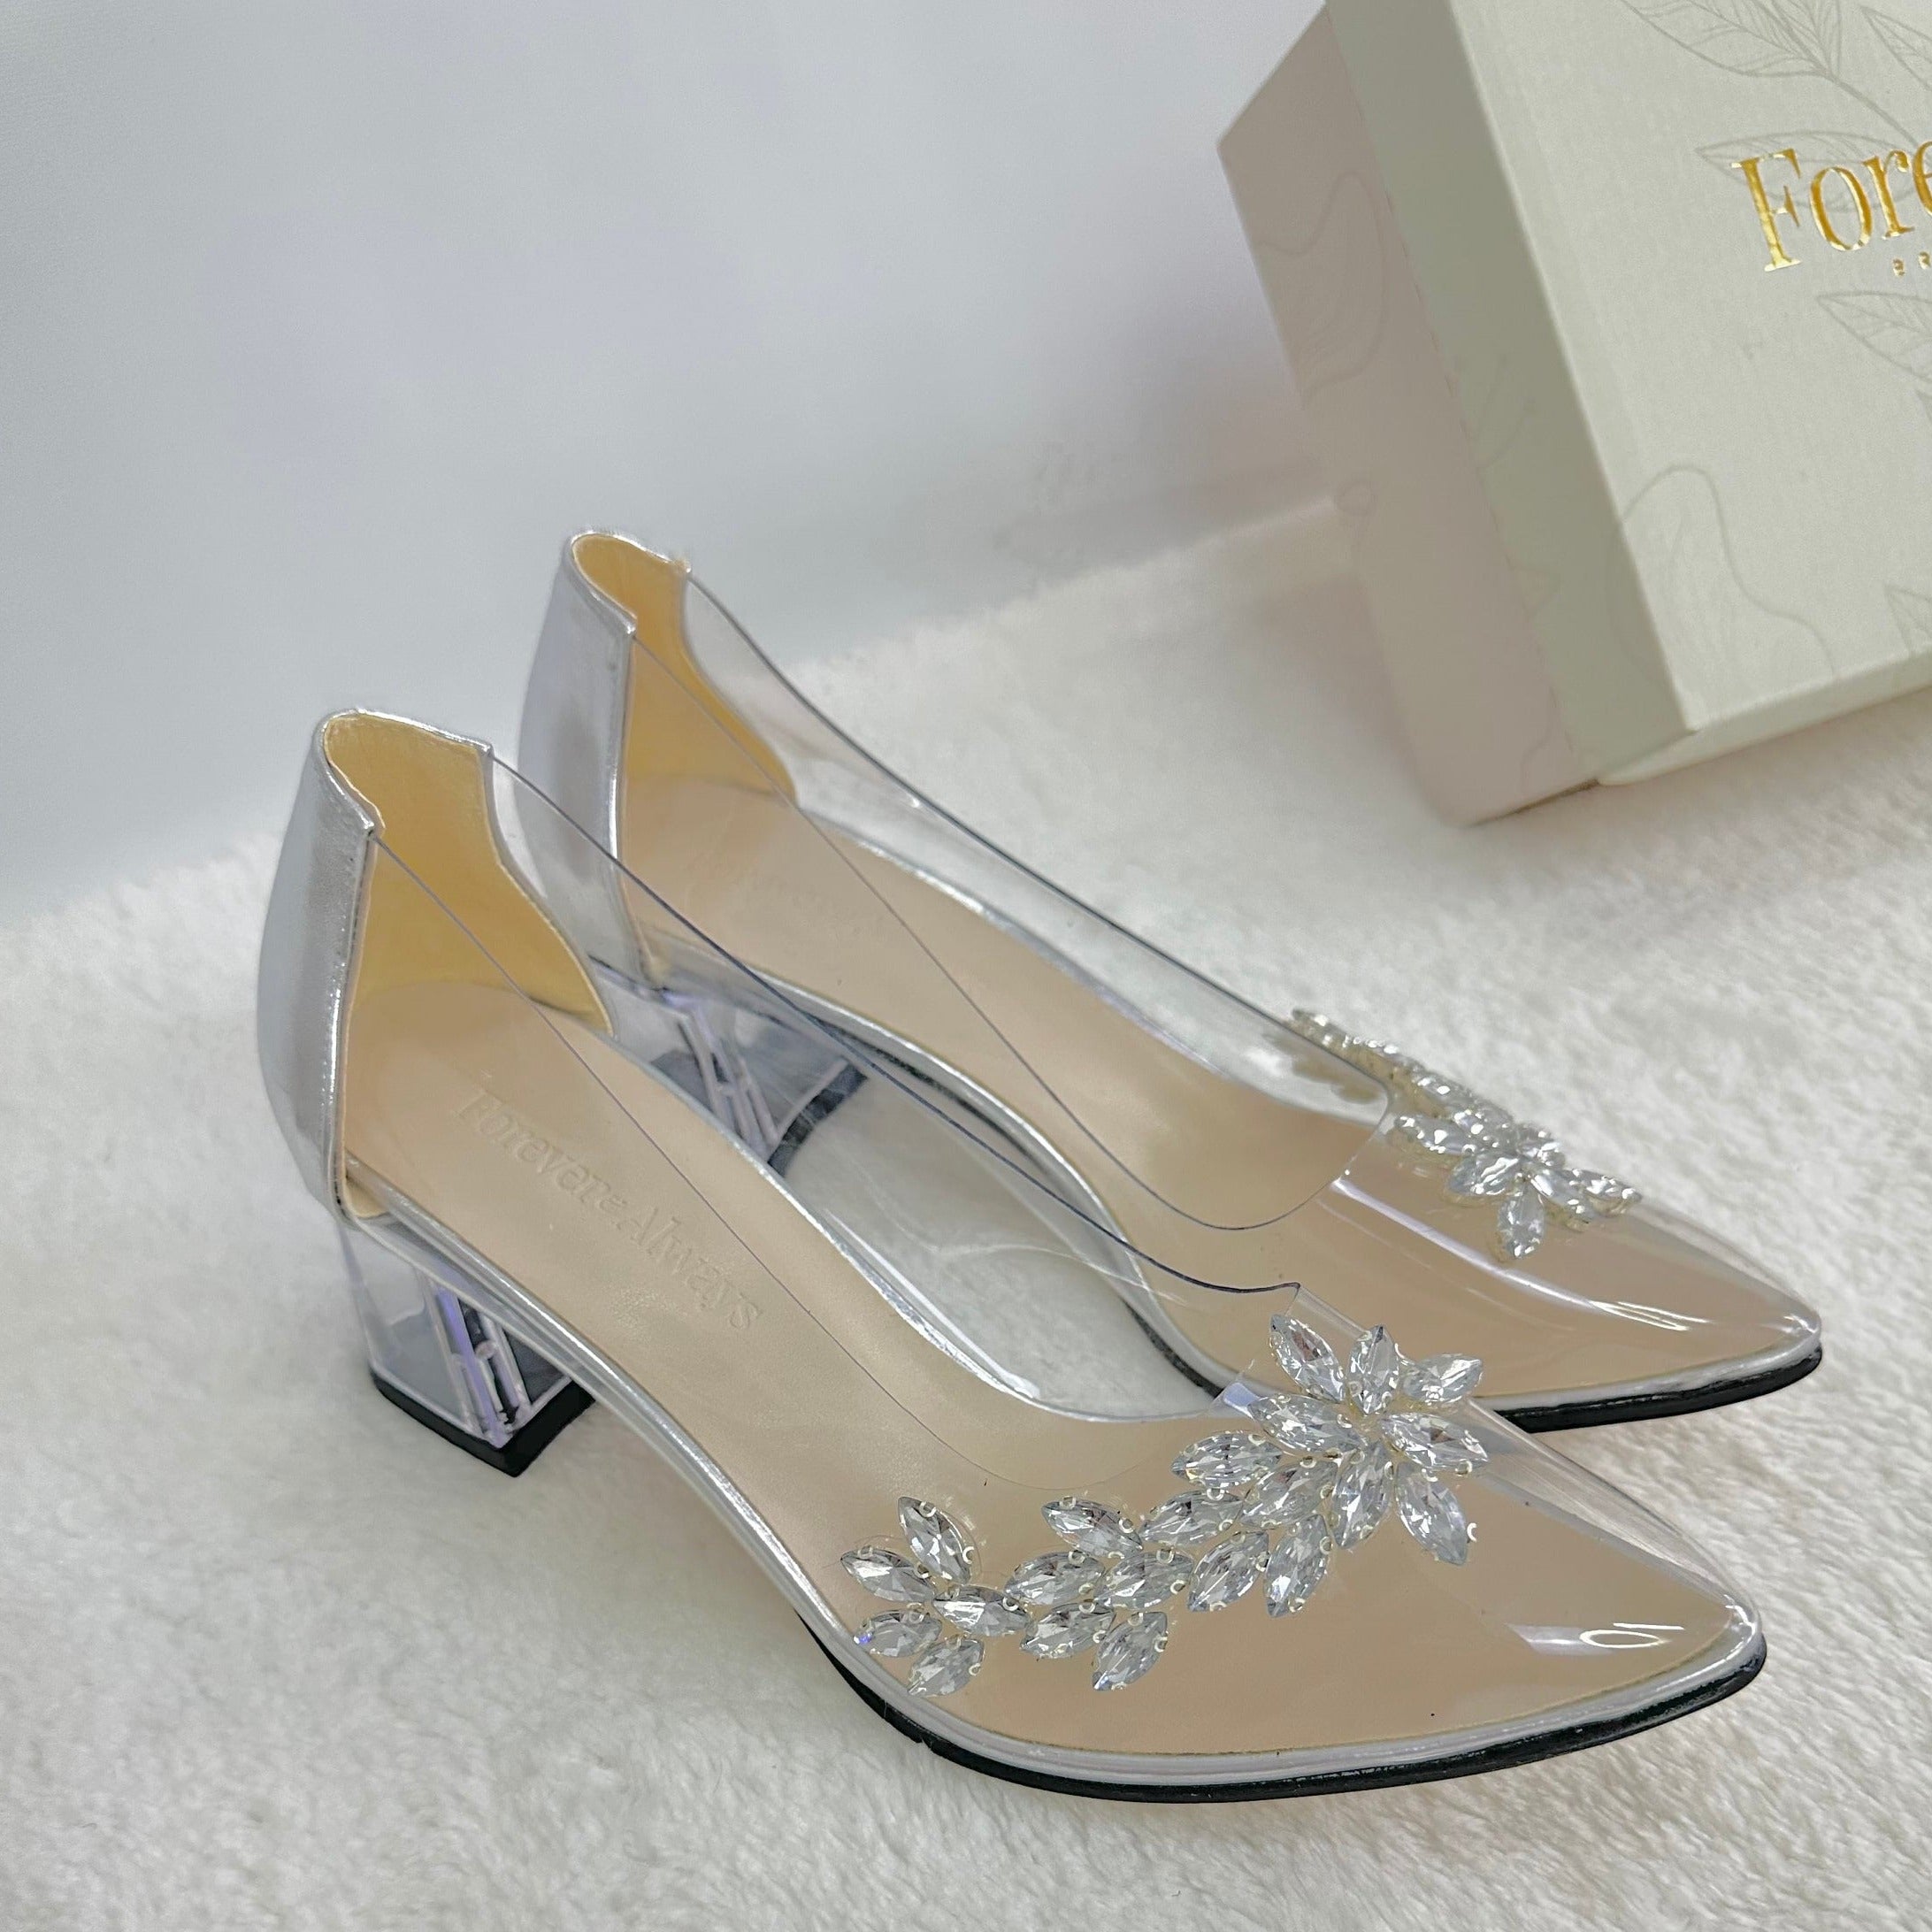 2 inch silver formal sandals